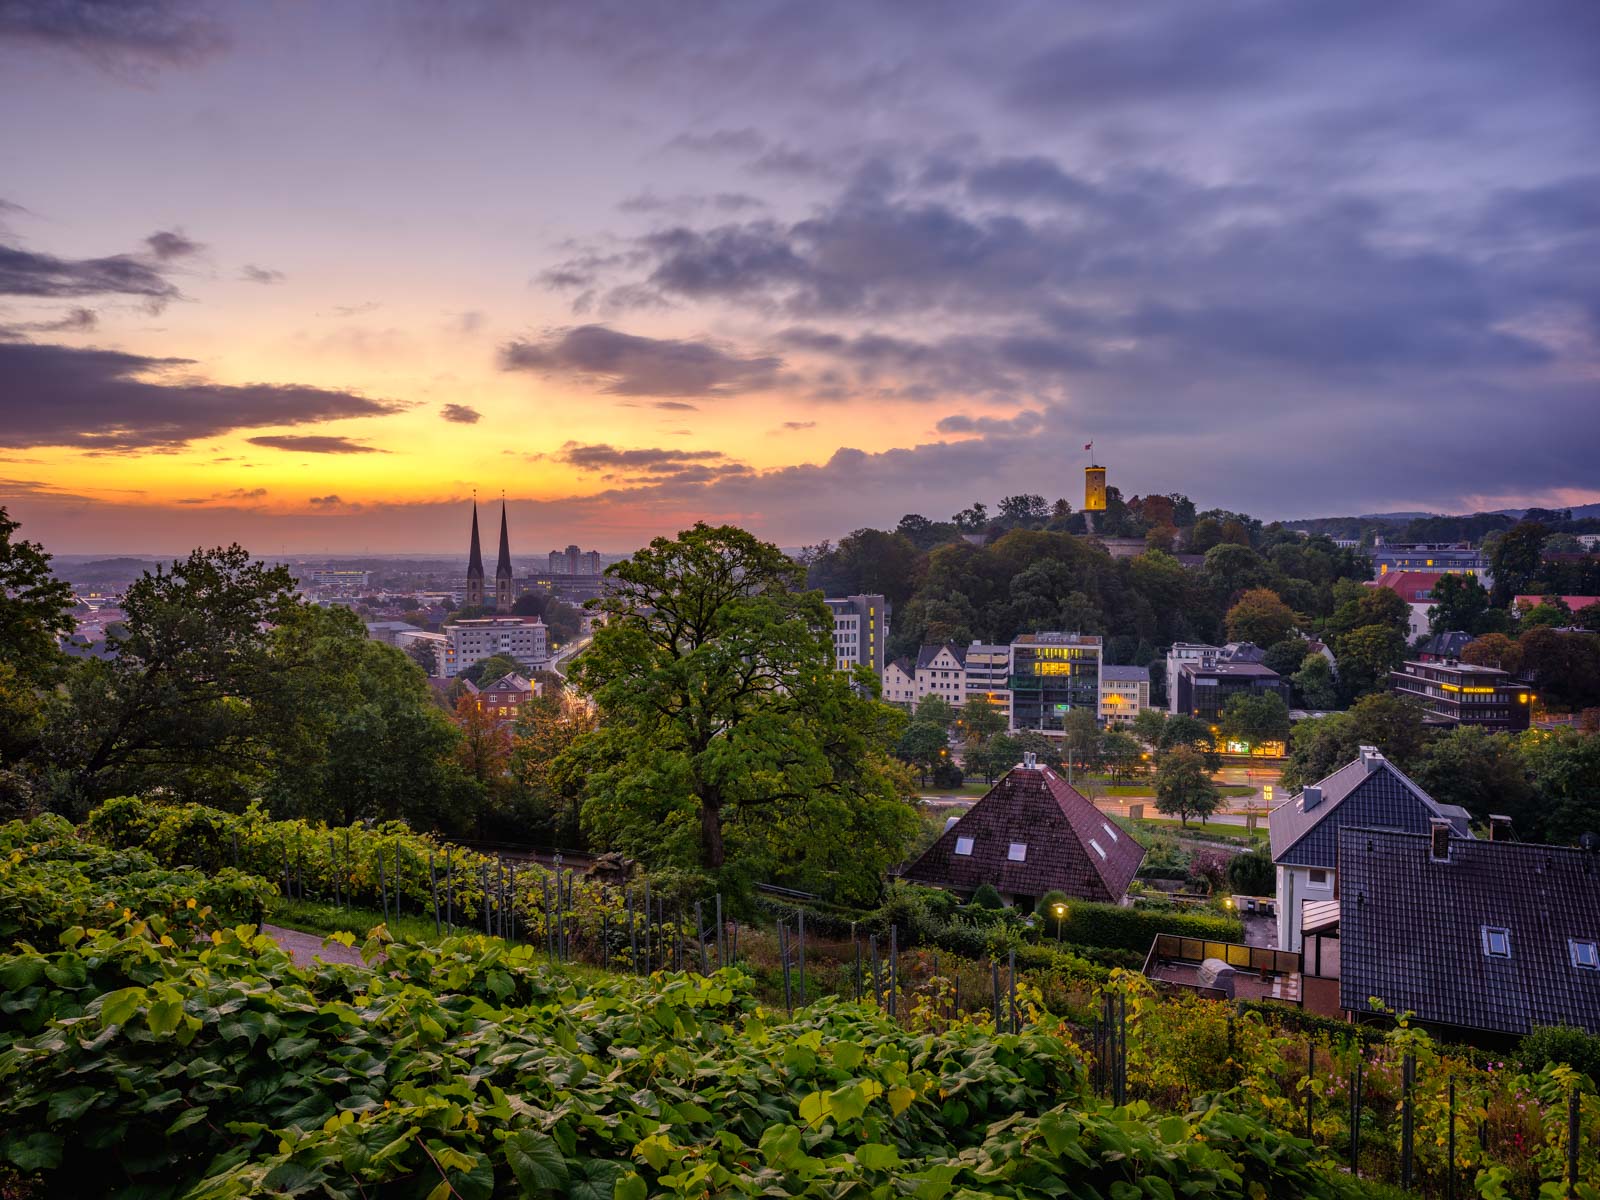 Bielefeld at dawn in late September 2021 photographed from the 'Johannisberg' (Germany).